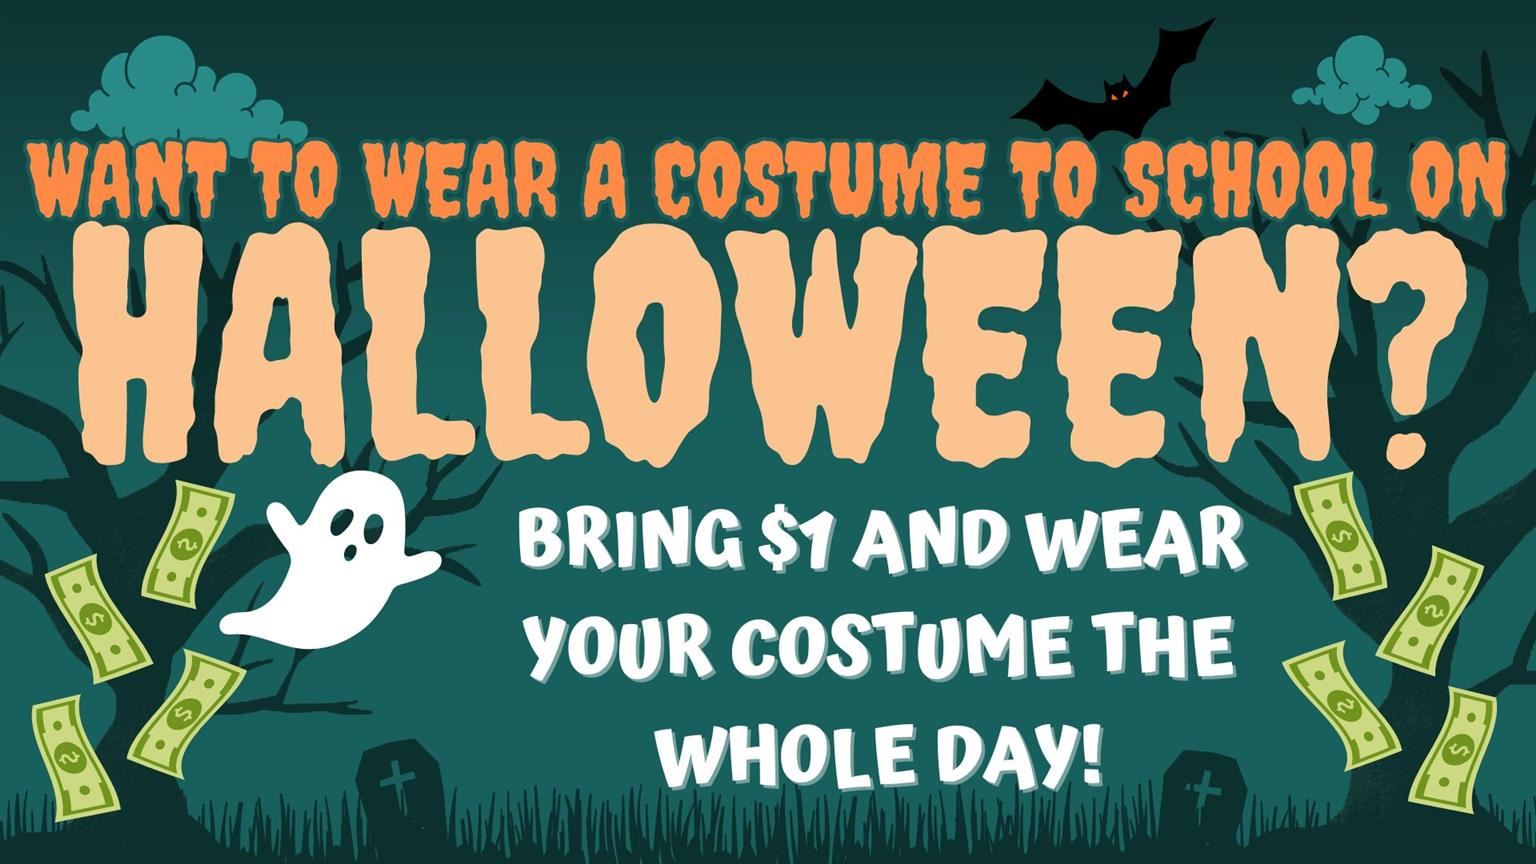 ASB held a Fundraiser for future ASB events. They charged $1 for students to wear their halloween costume to school.